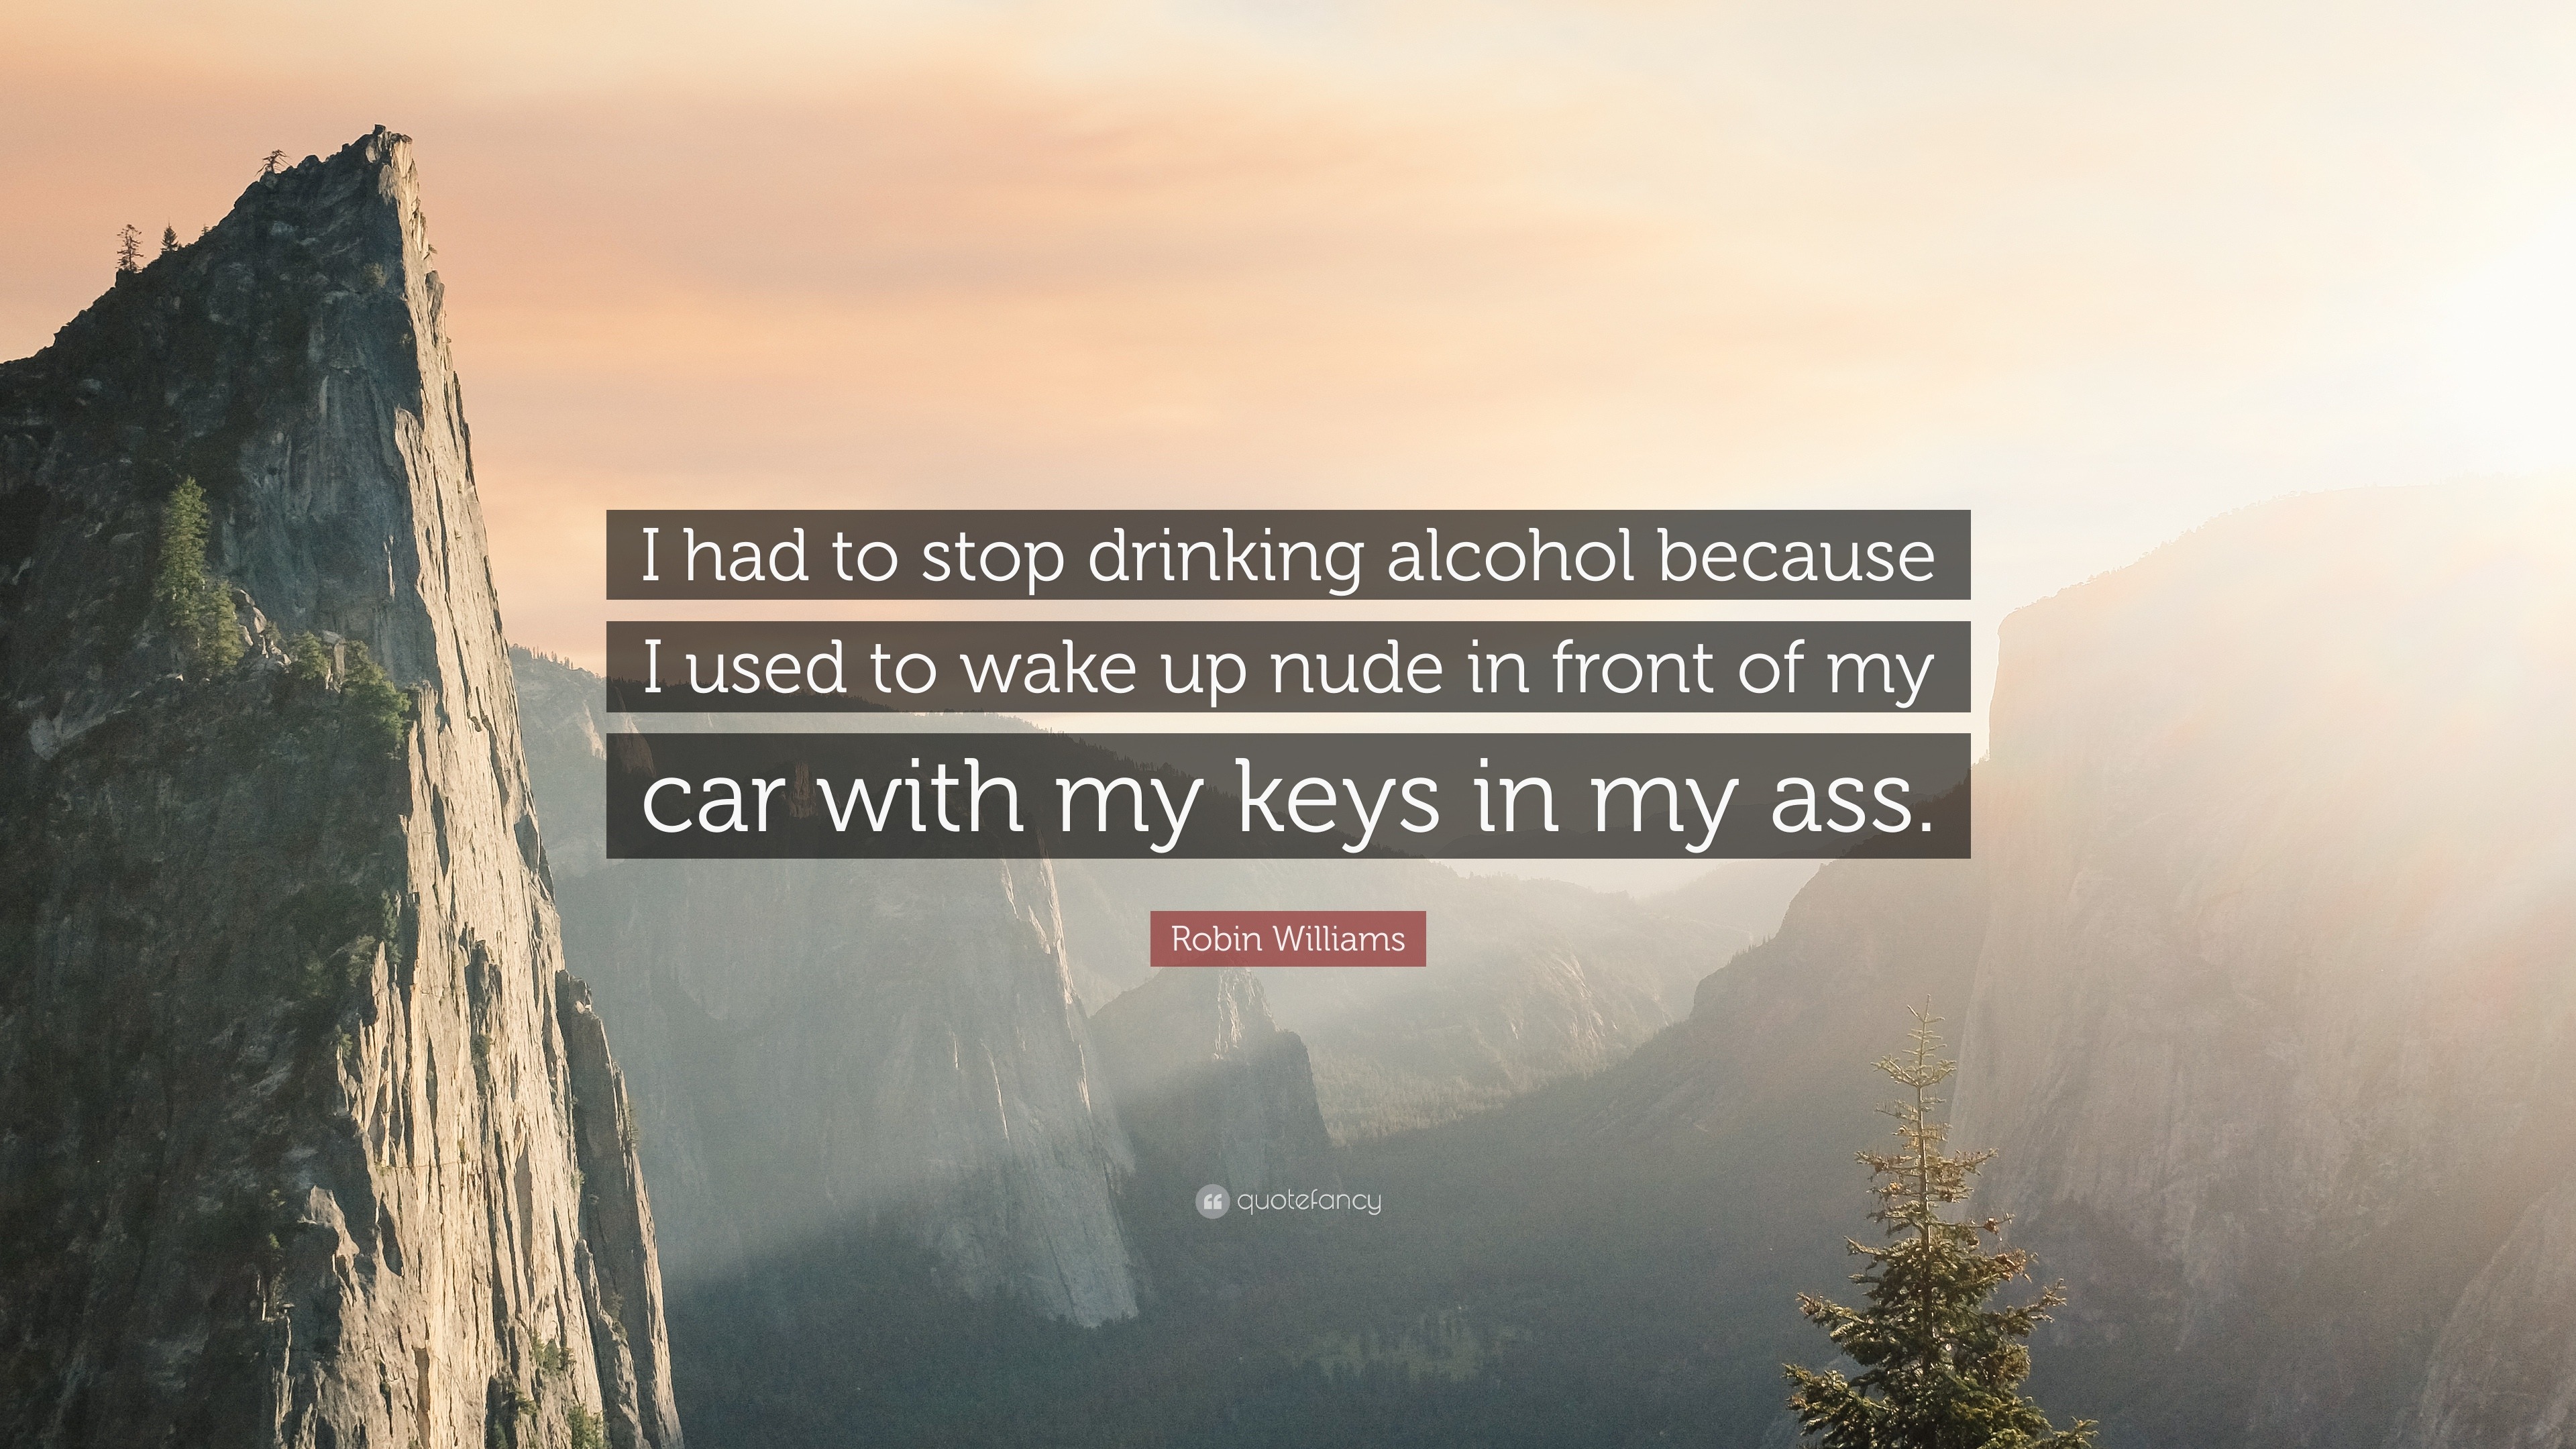 Quotes to stop drinking alcoholic Drinking Quotes